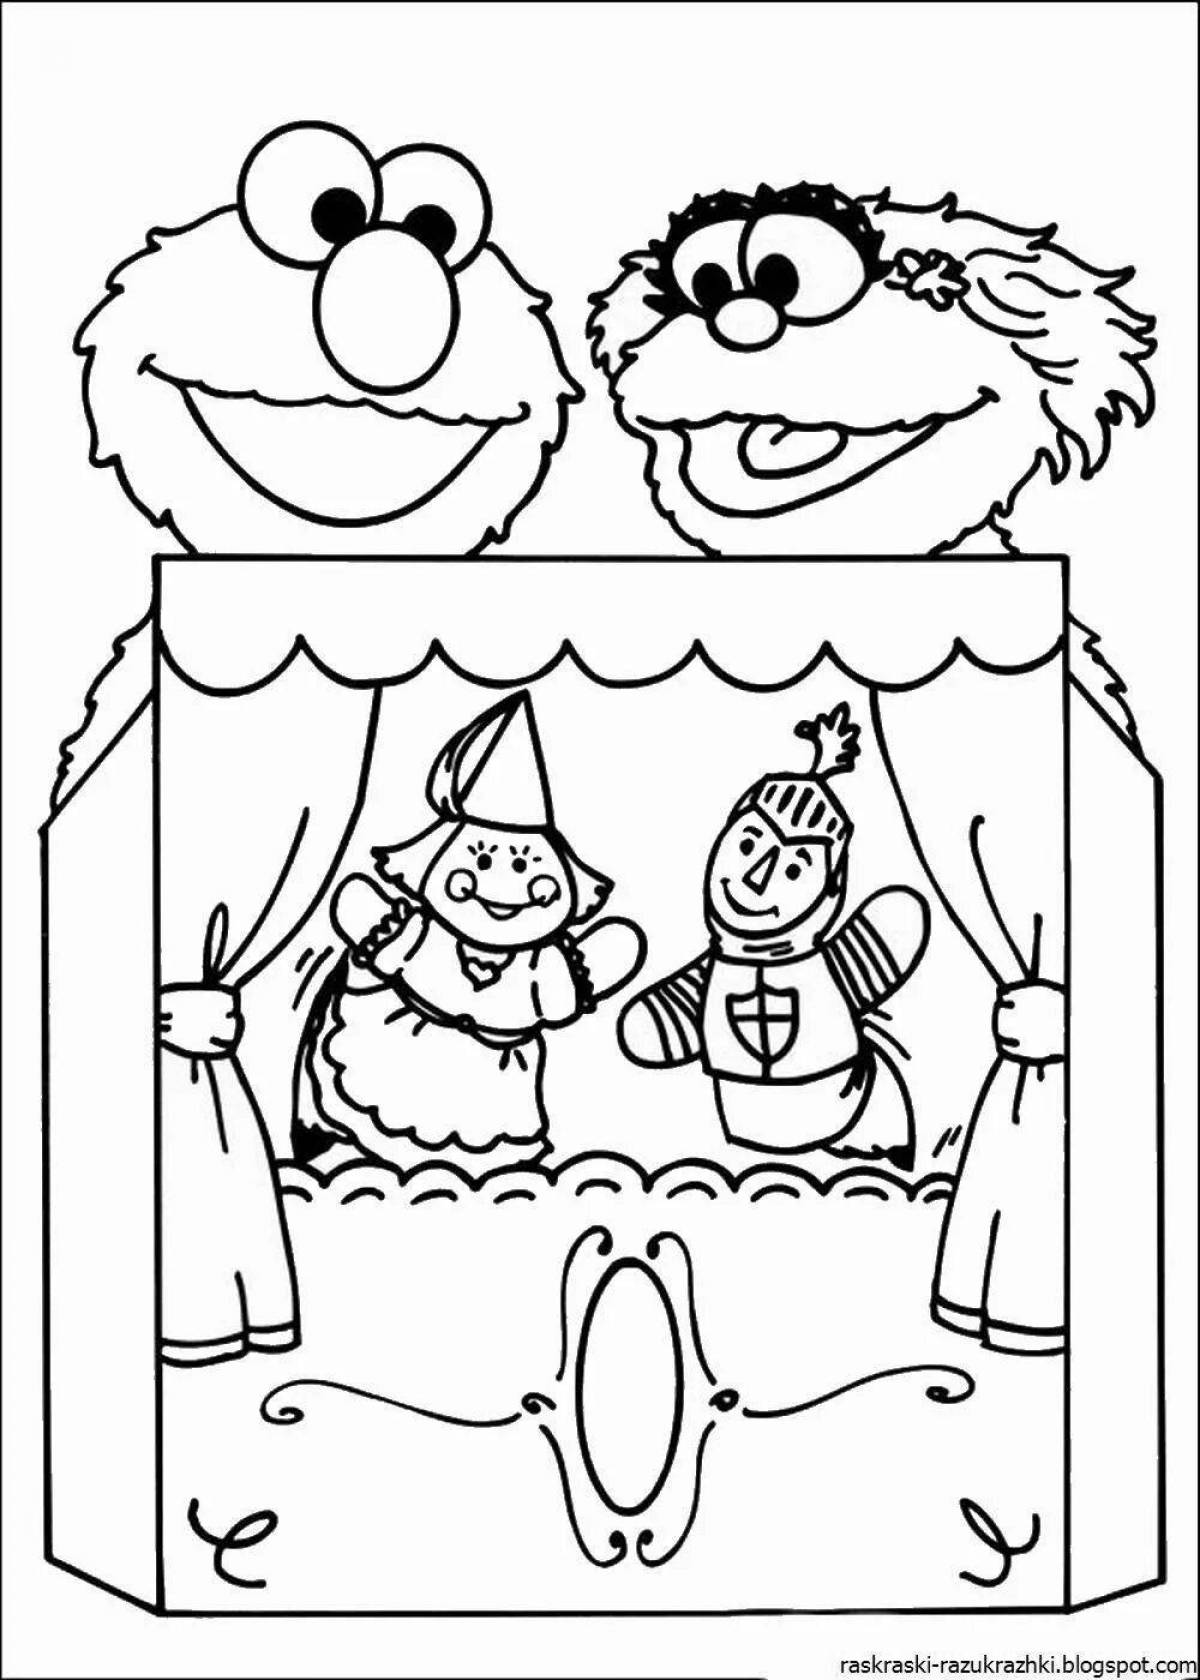 Fun theater coloring for kids